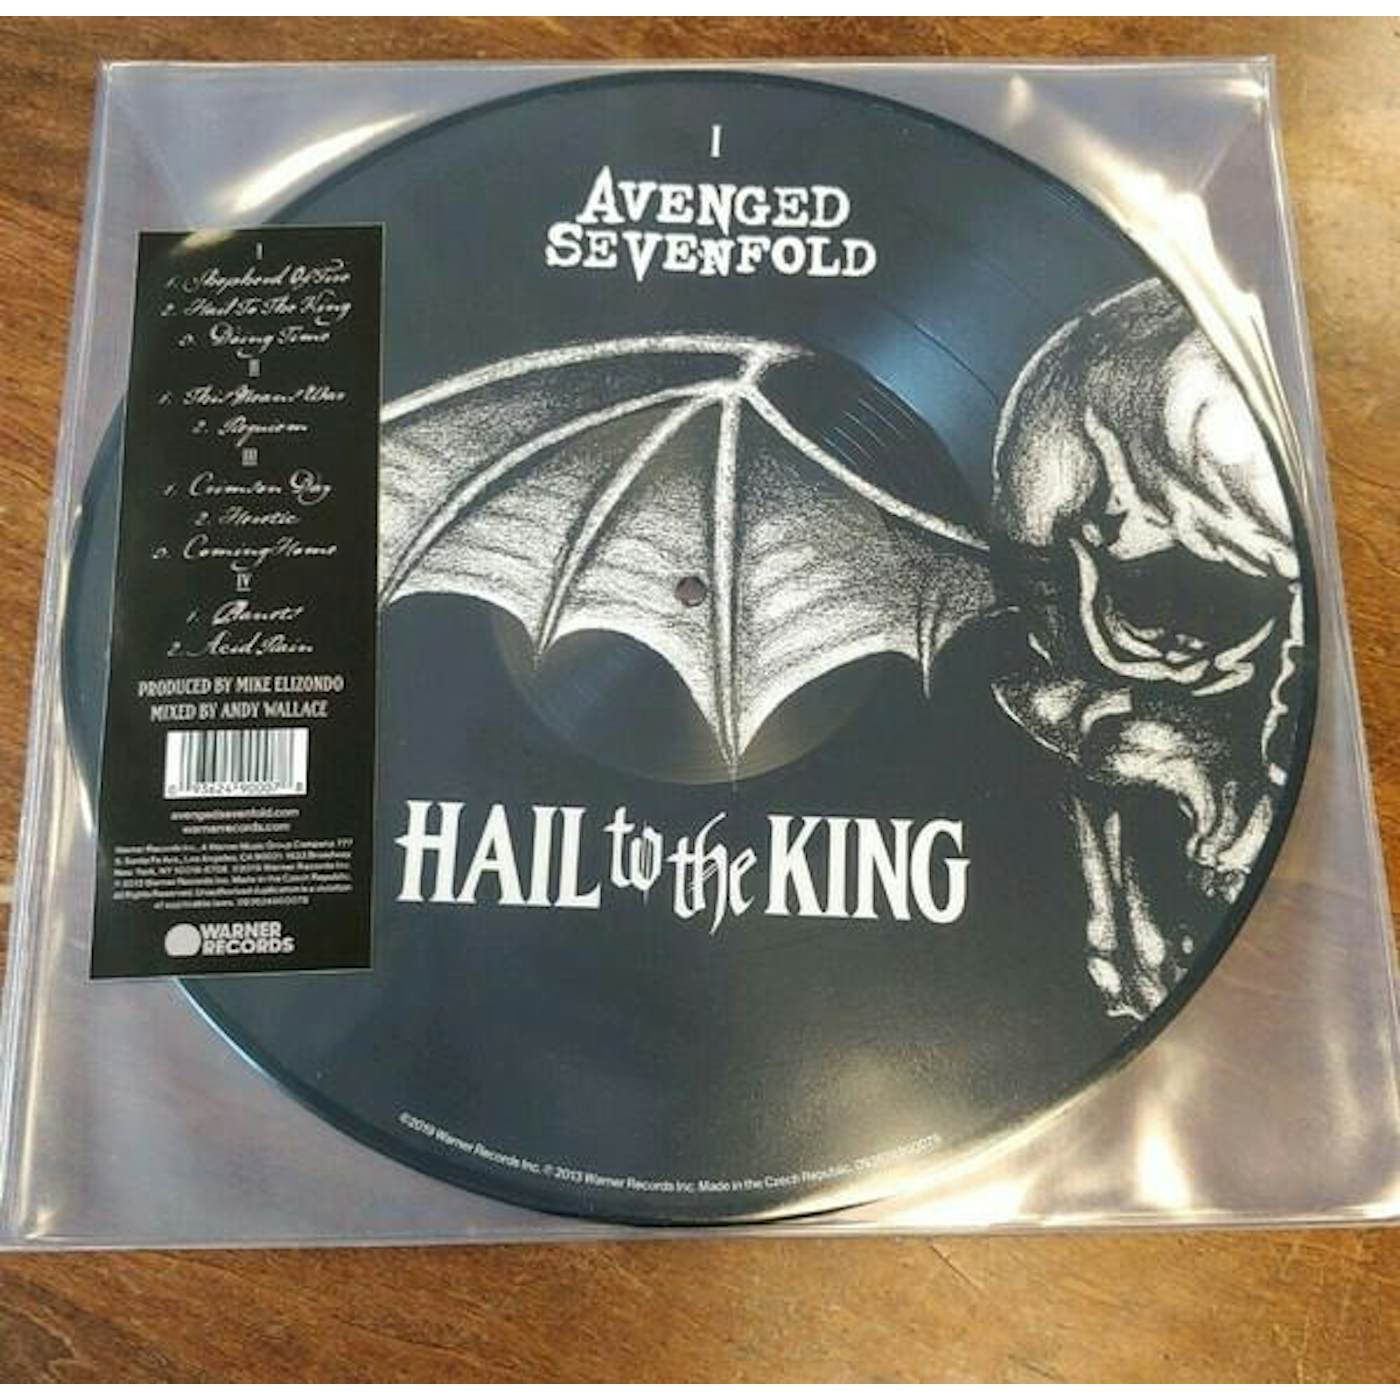 Avenged Sevenfold HAIL TO THE KING (2LP/PICTURE DISC) Vinyl Record